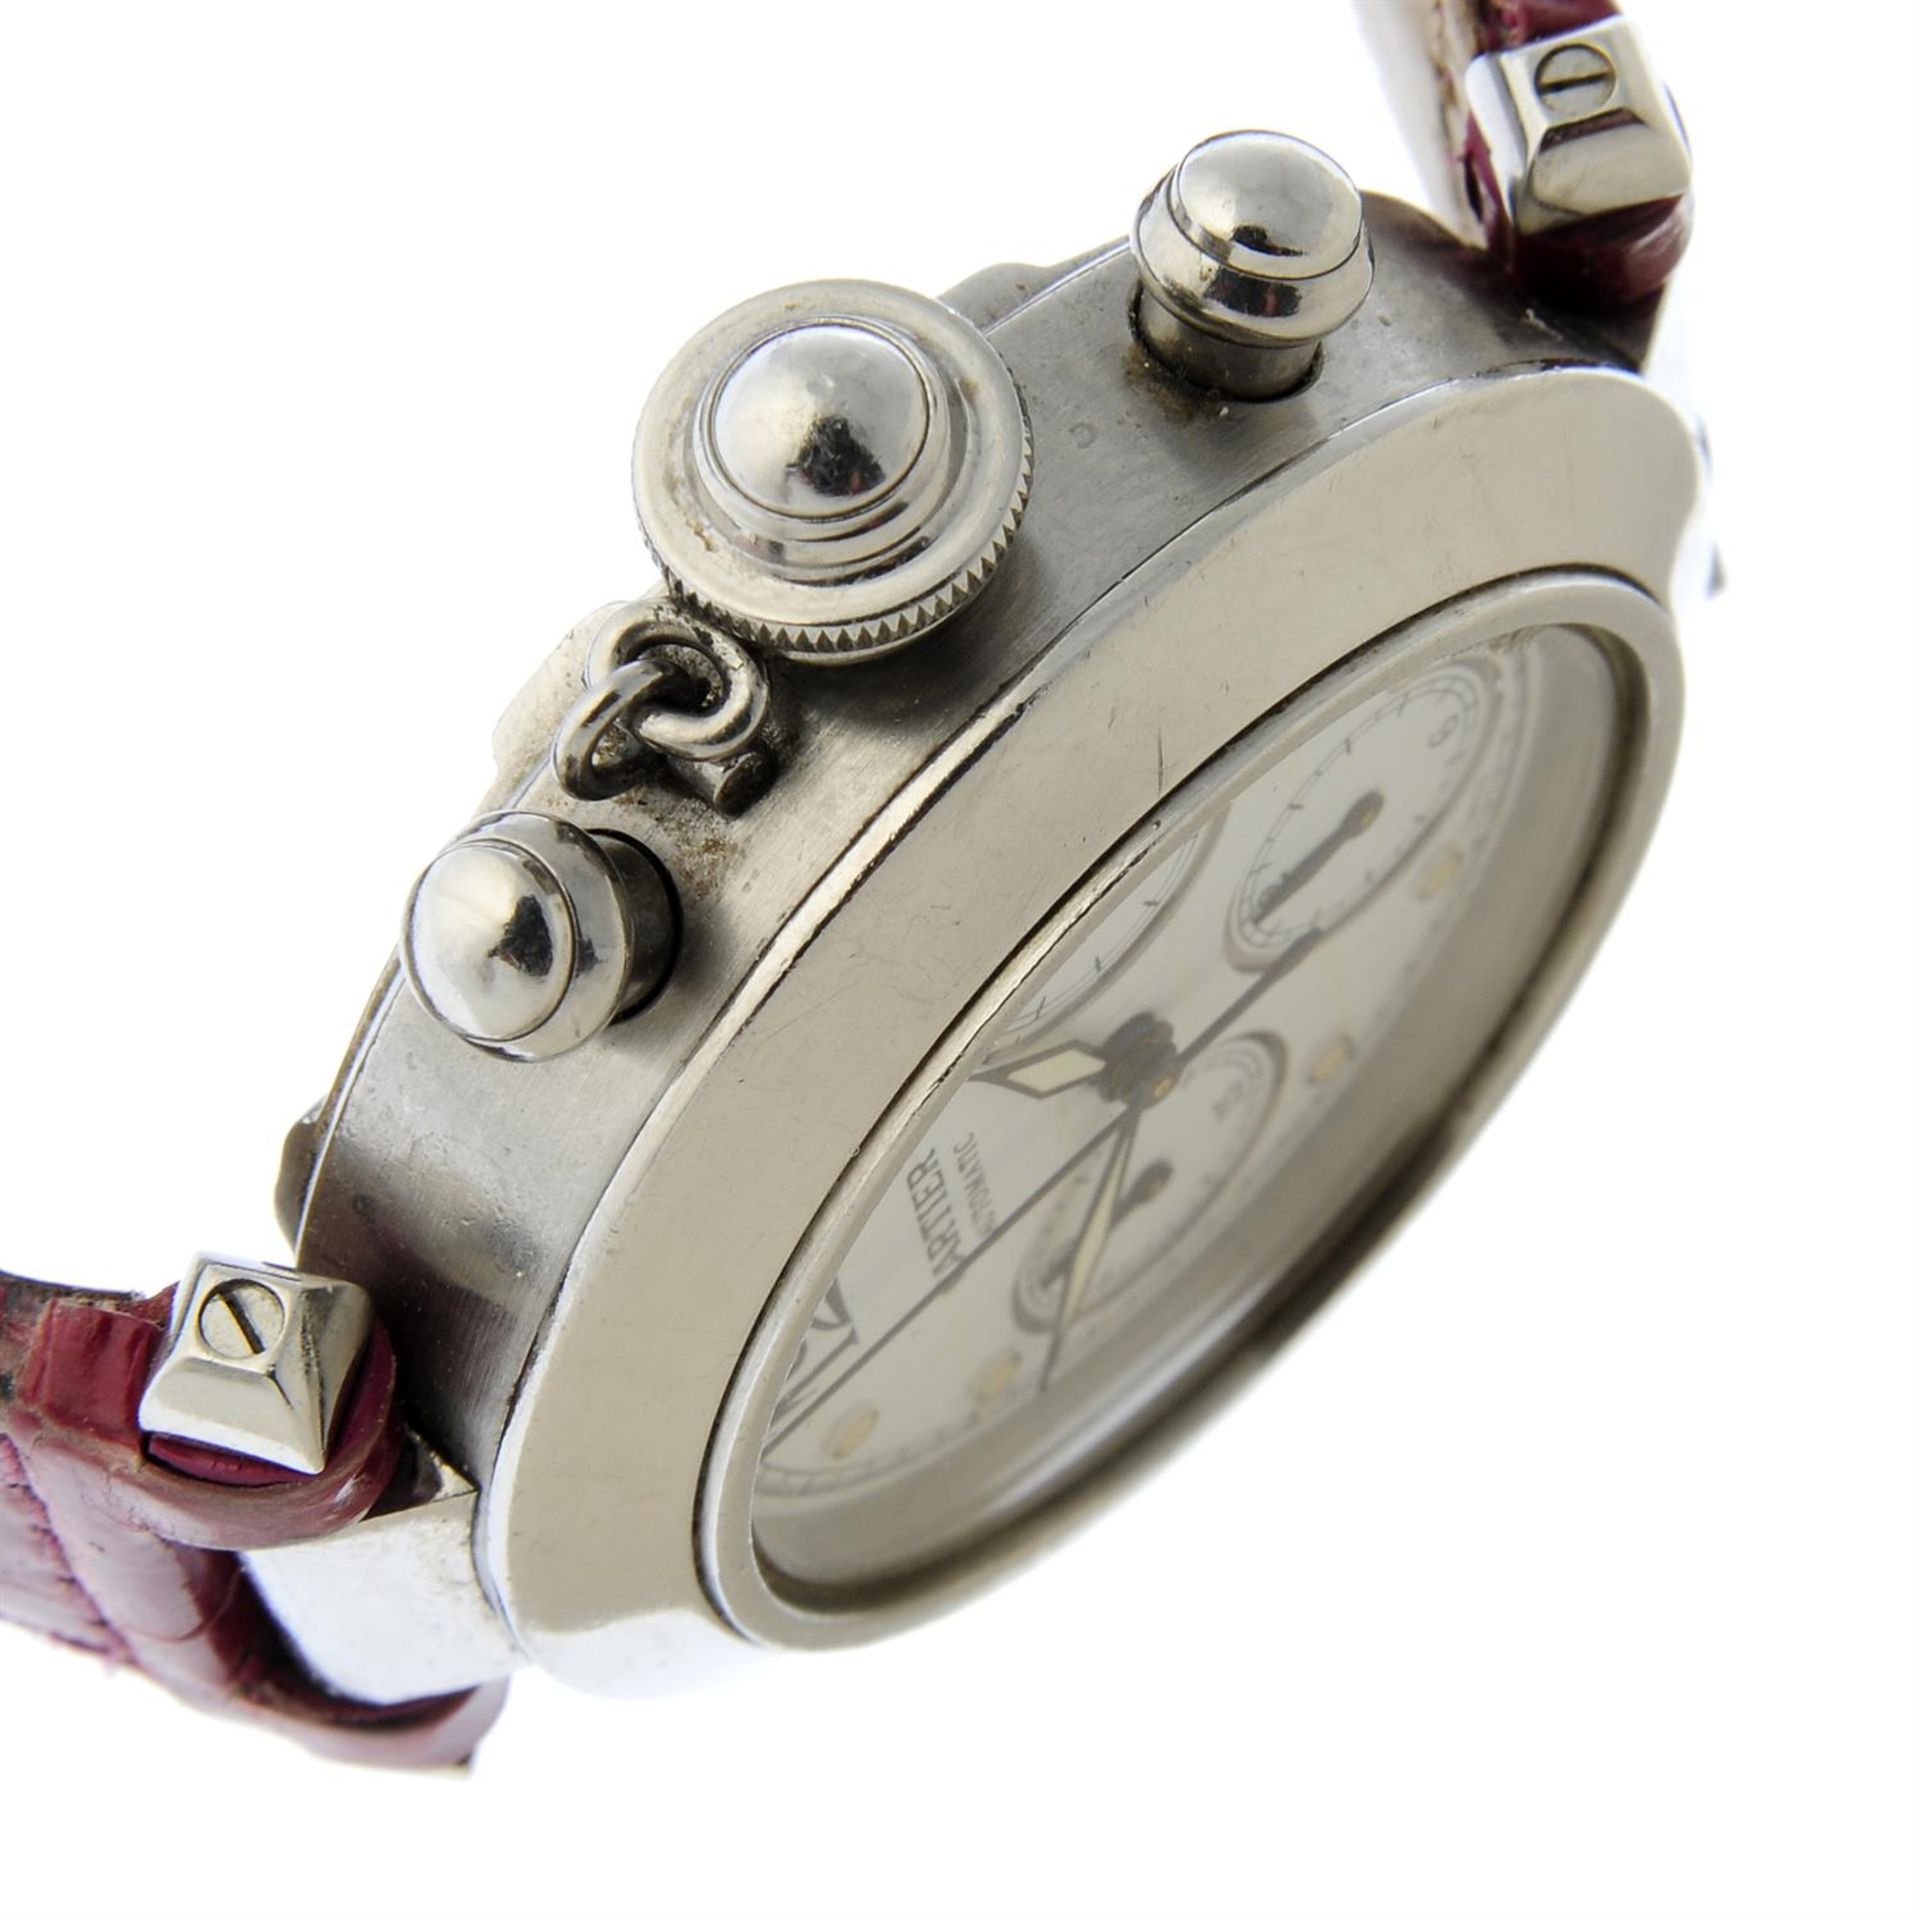 CARTIER - a stainless steel Pasha chronograph wrist watch, 36mm. - Image 3 of 5